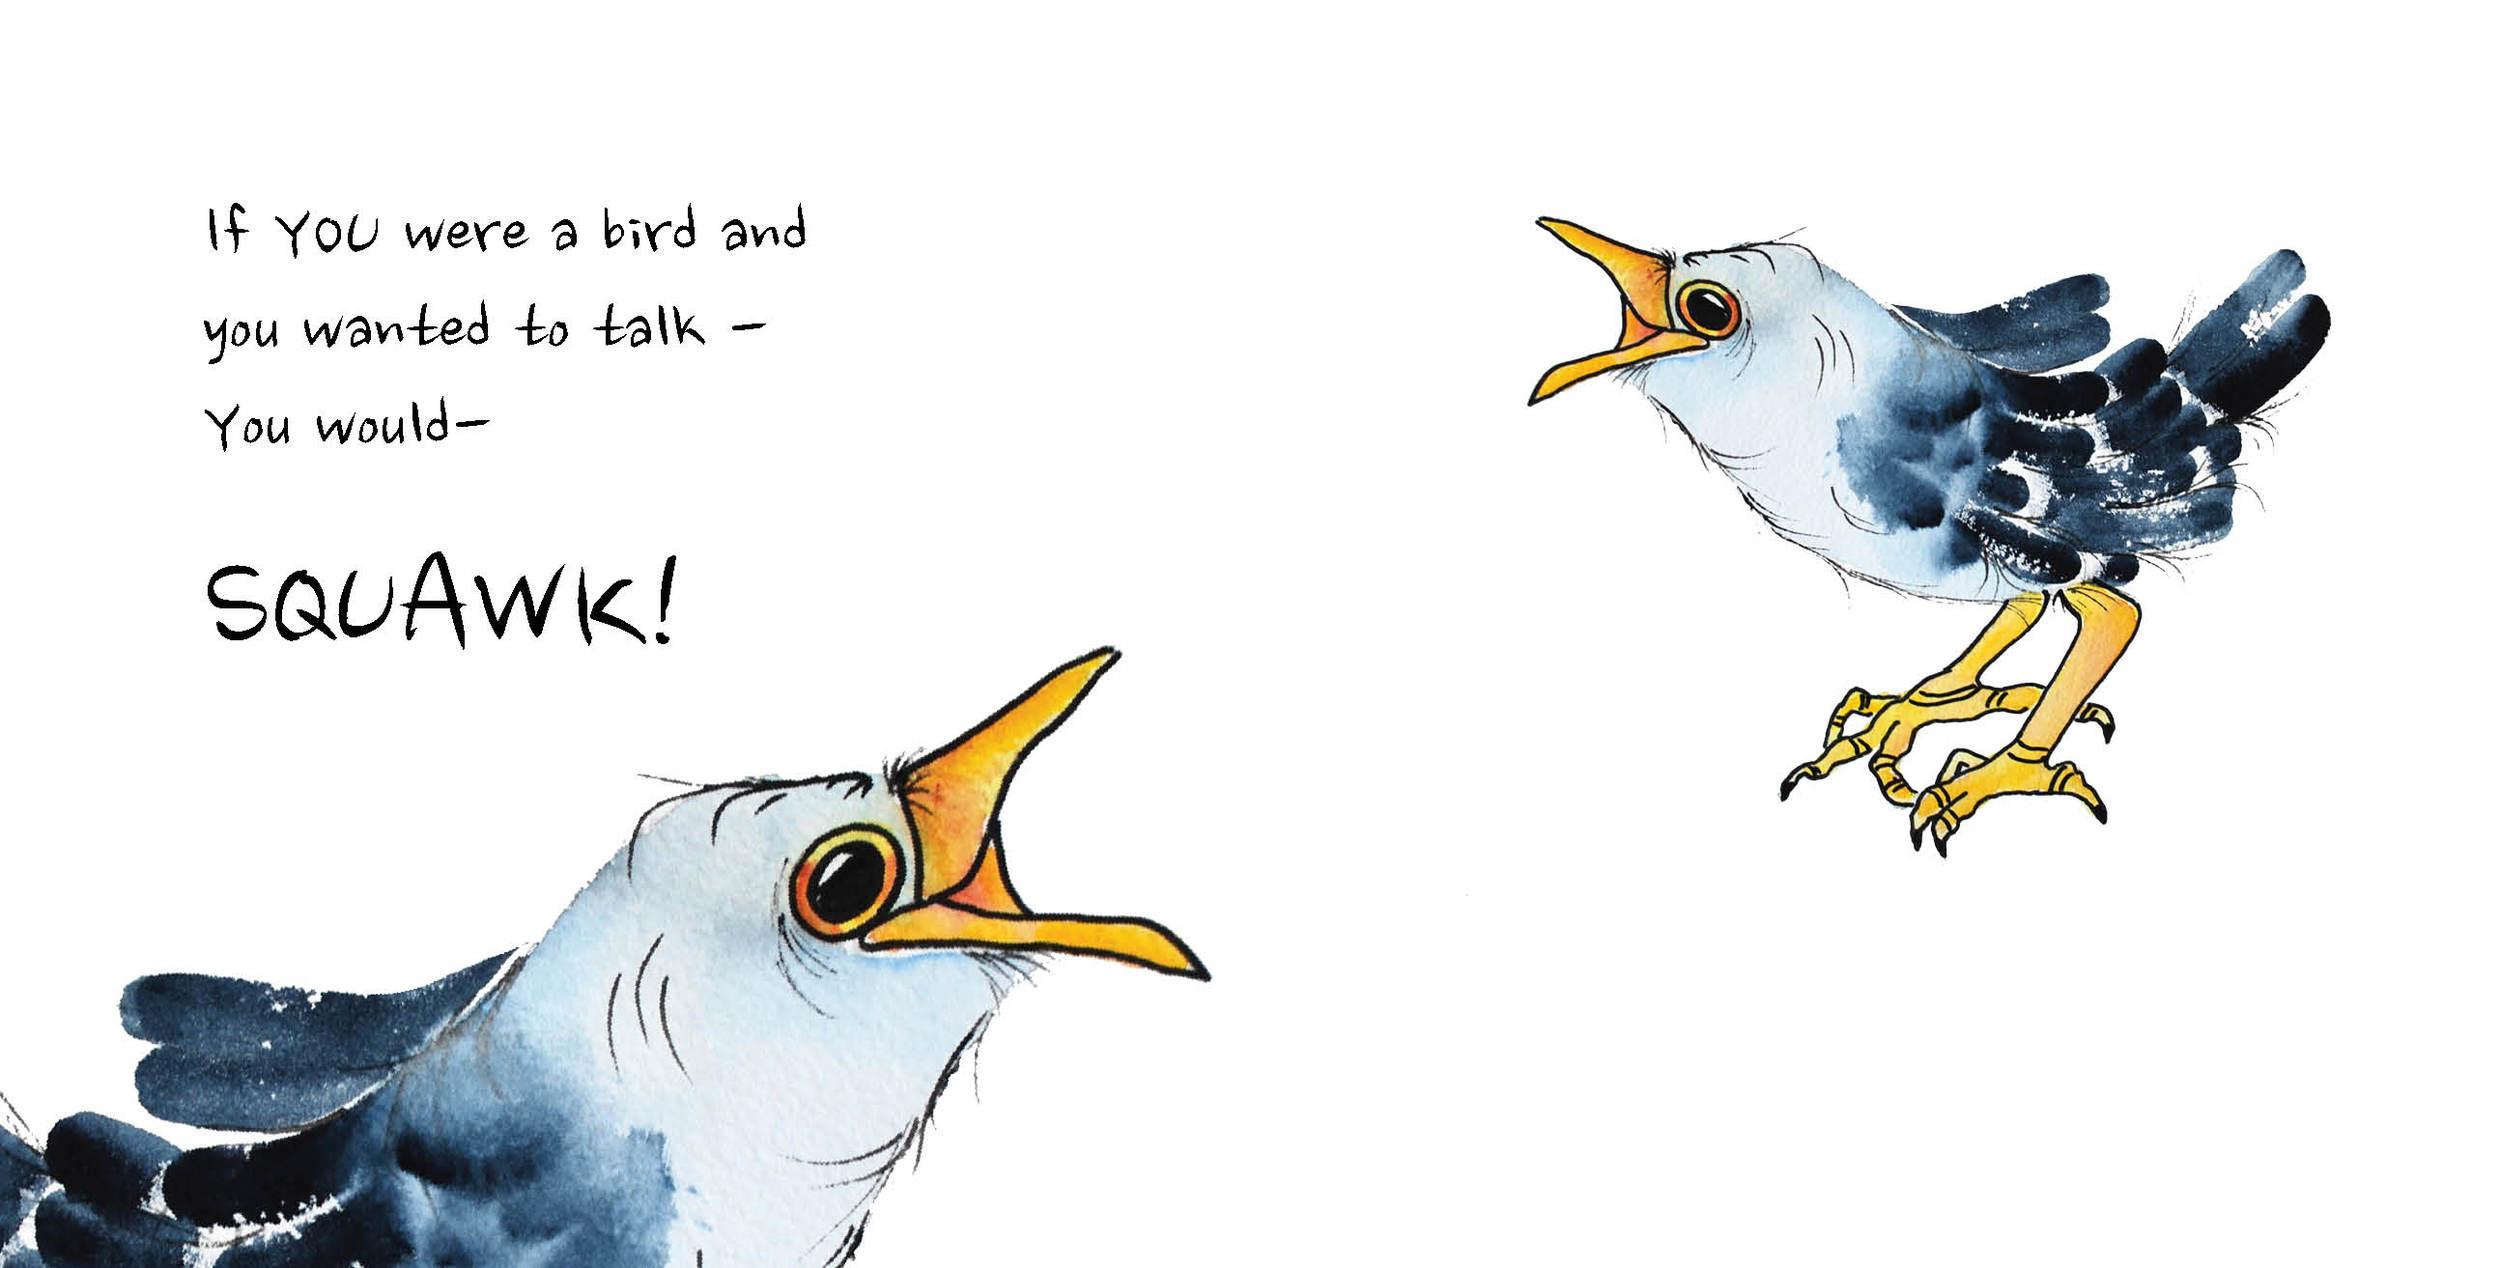 If You Were a Bird 3 pages5.jpg